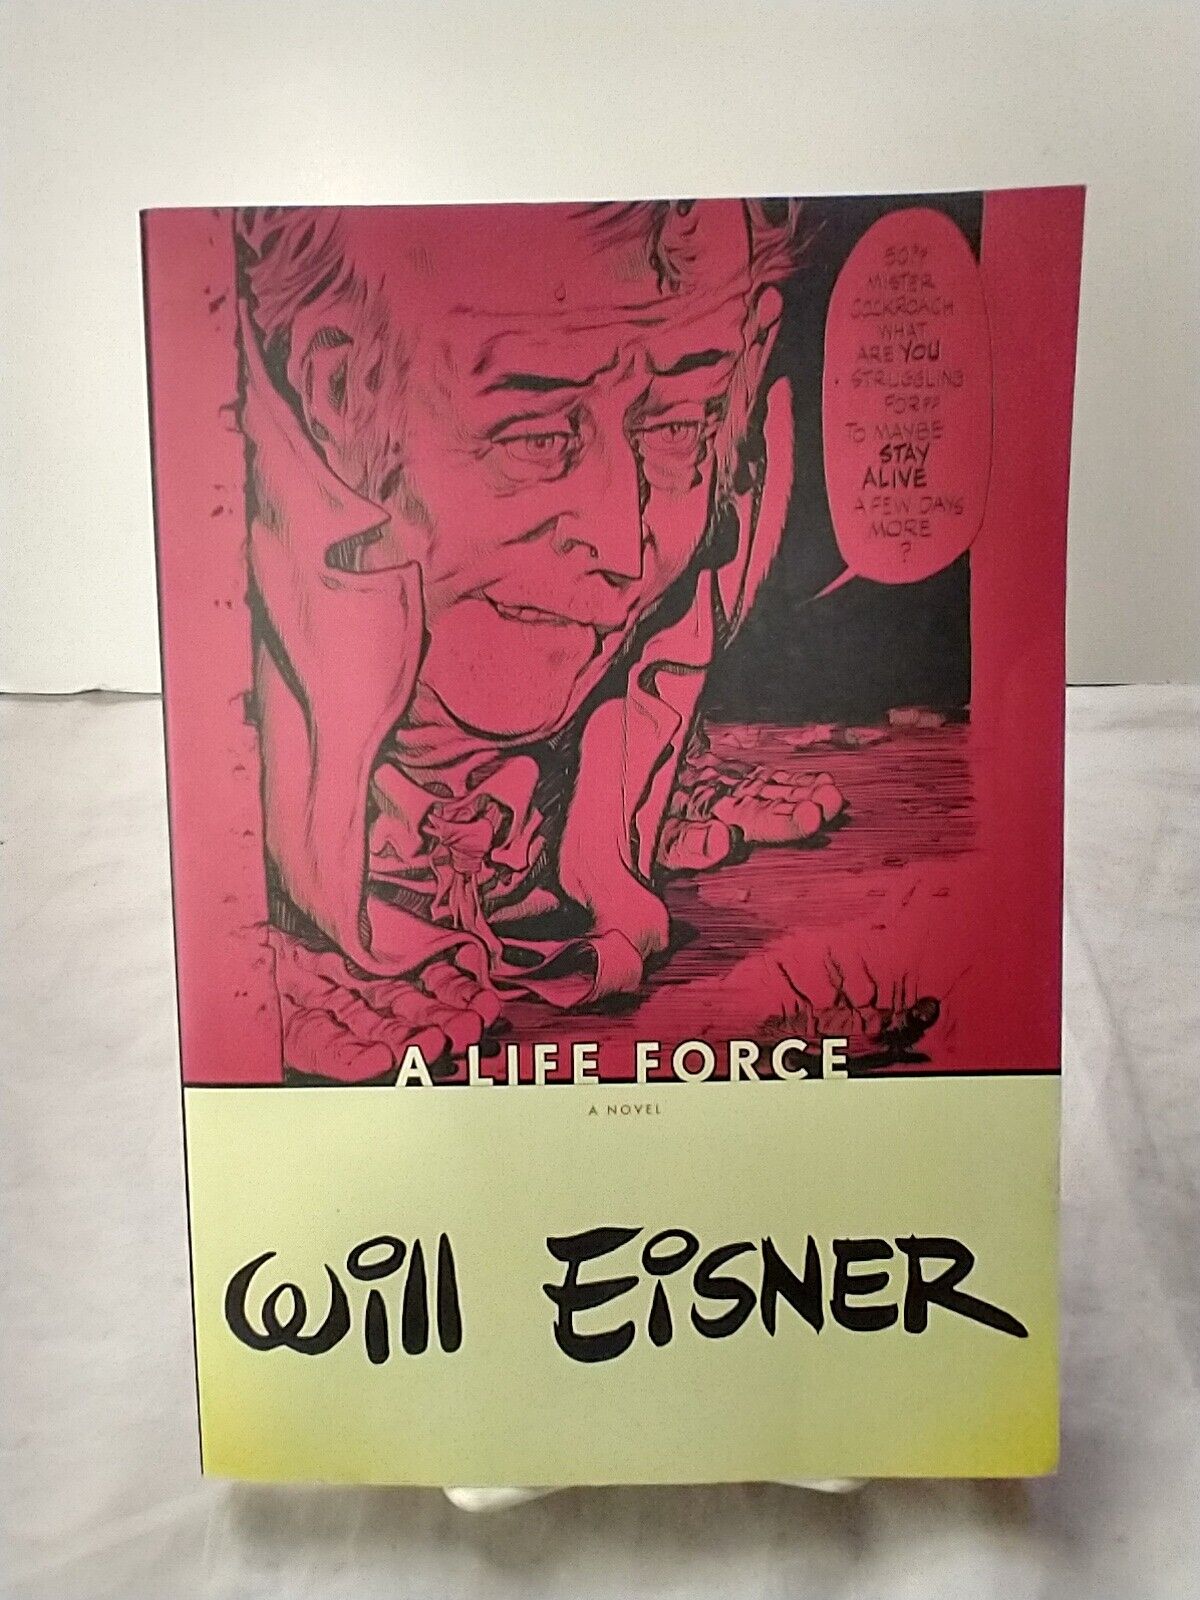 A Life Force Trade Paperback Will Eisner